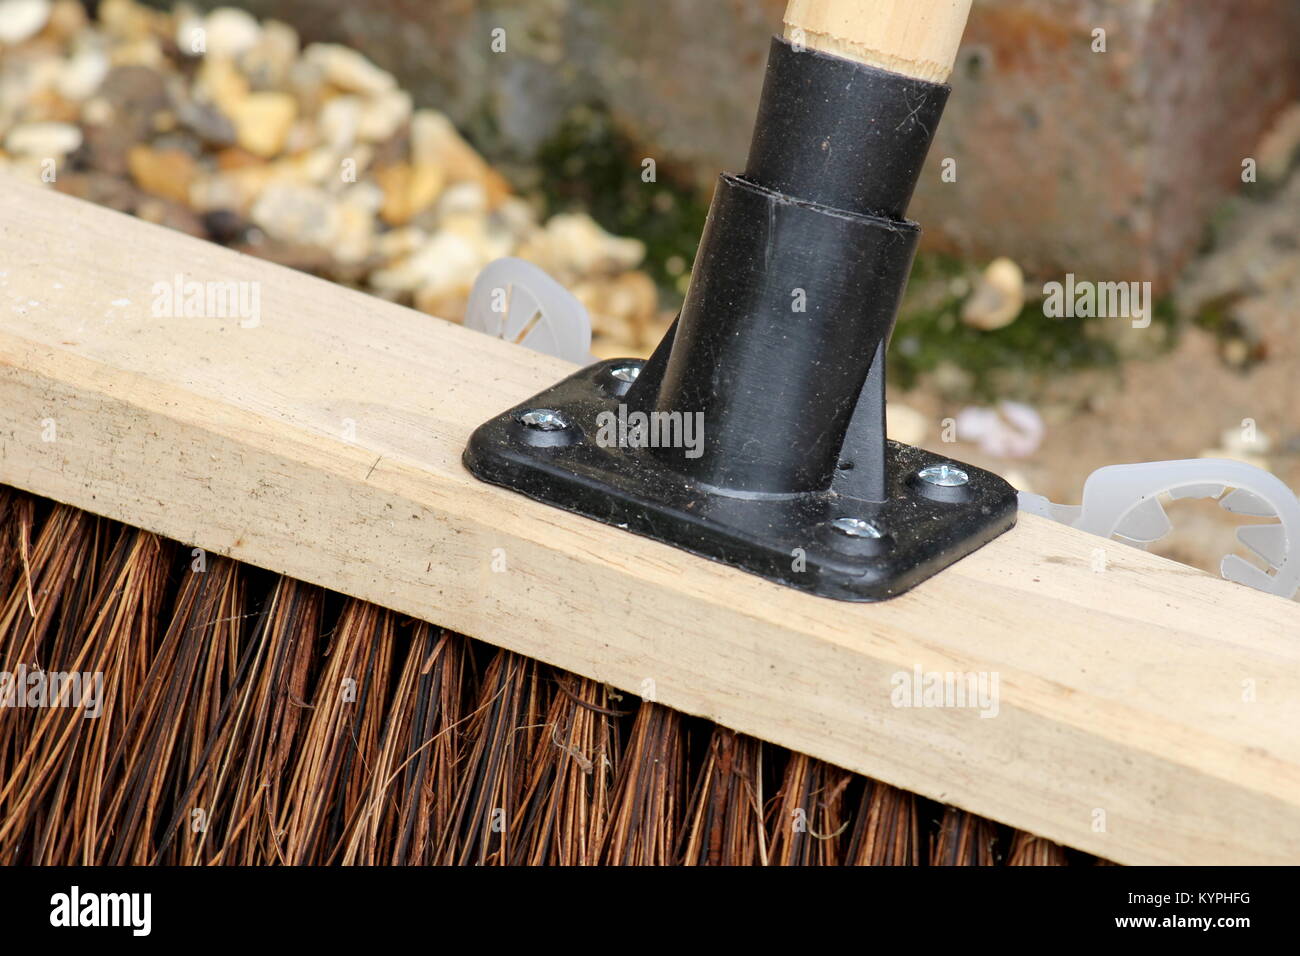 Close up of a garden broom or yard brush where the handle meets the head Stock Photo